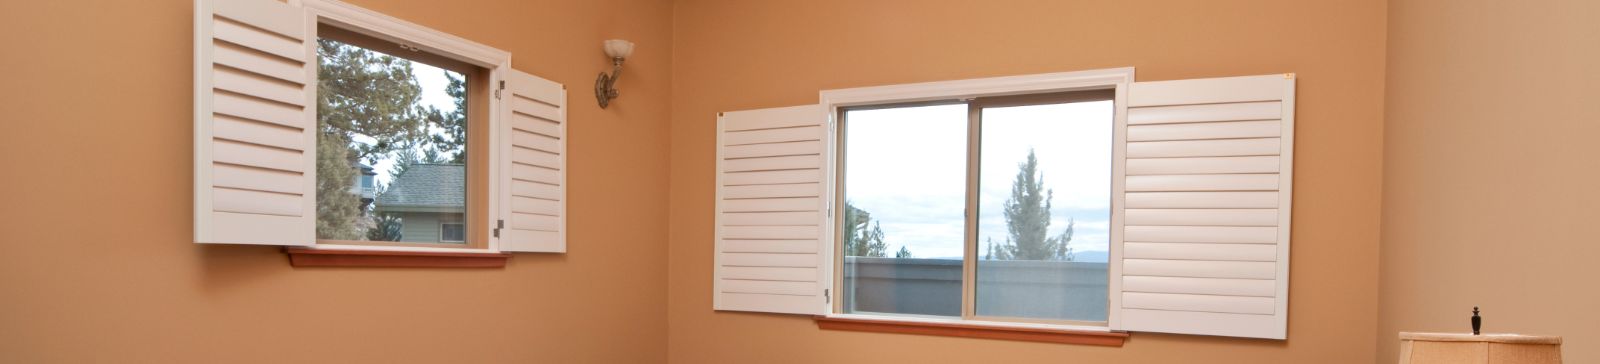 Cordless Blinds and Shades